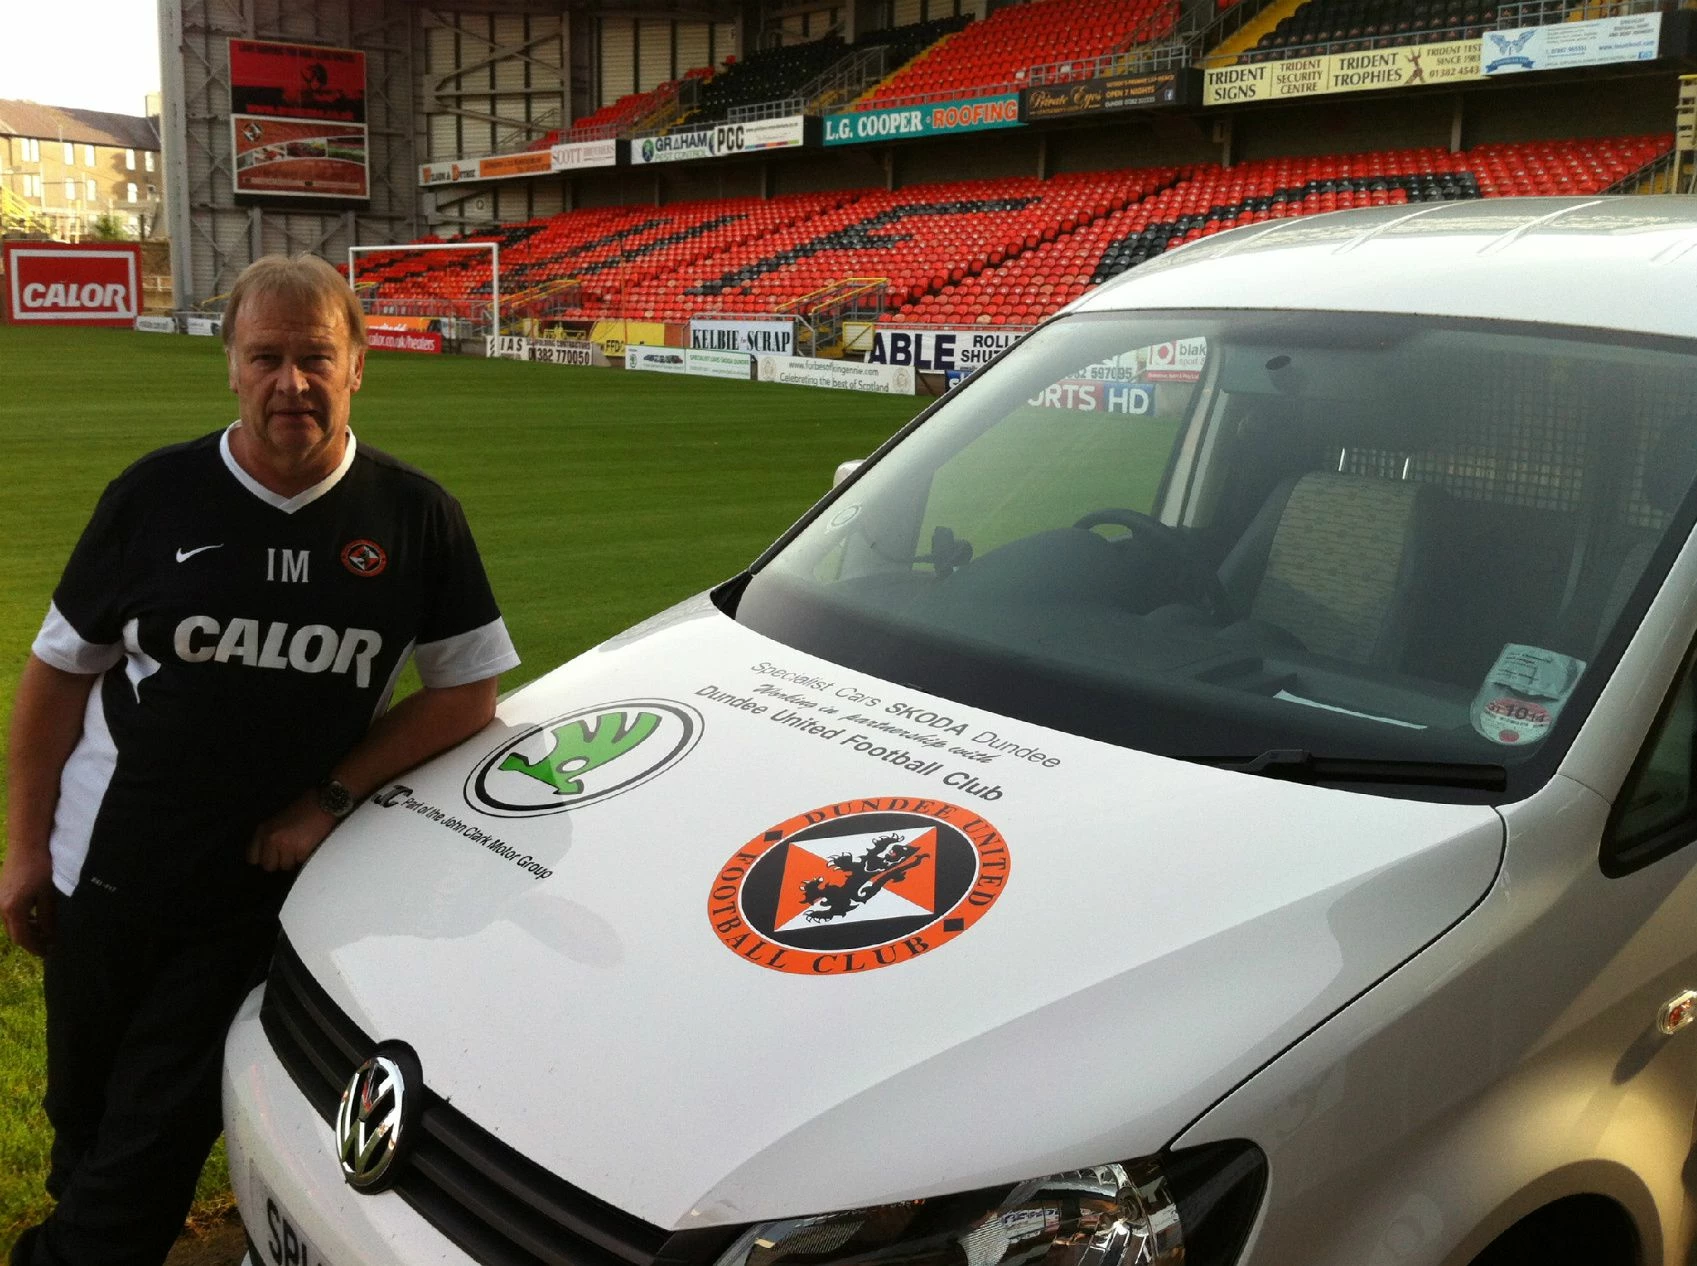 Ian McIntyre, the kit man for Dundee United Football Club with the club Caddy Van from Clark Commerc